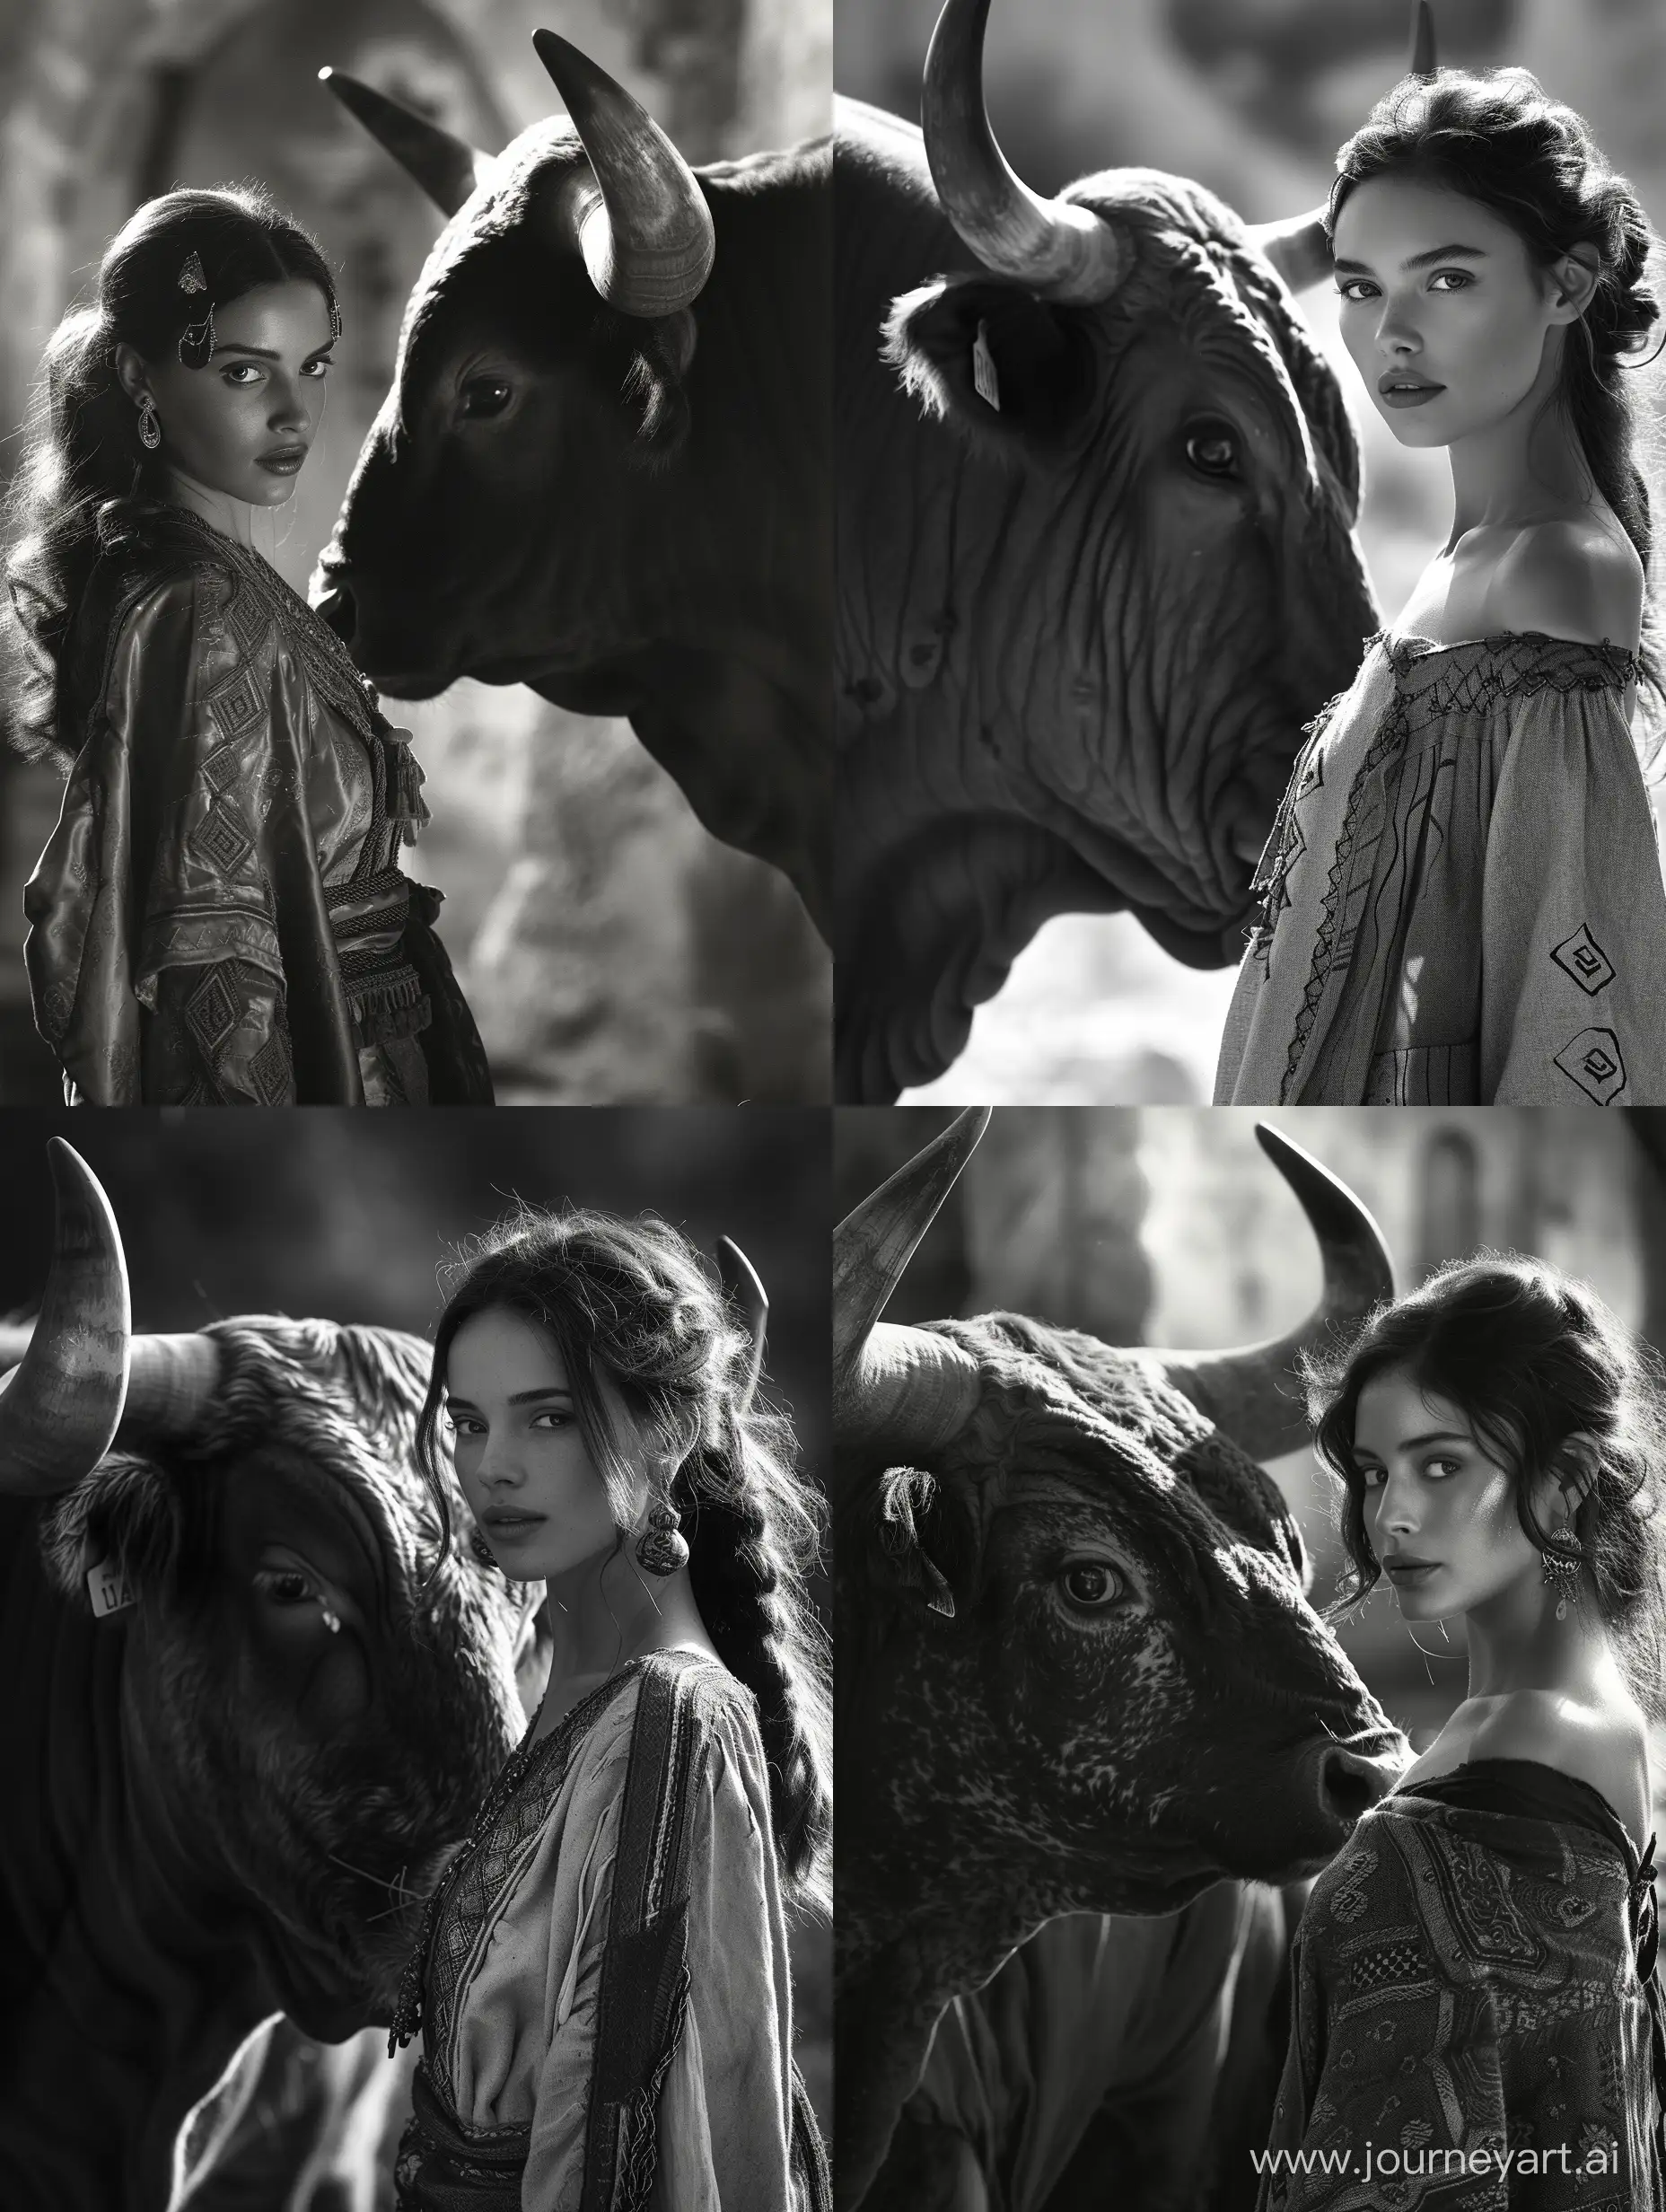 Elegant-Woman-and-Majestic-Bull-Timeless-Beauty-and-Strength-in-Monochrome